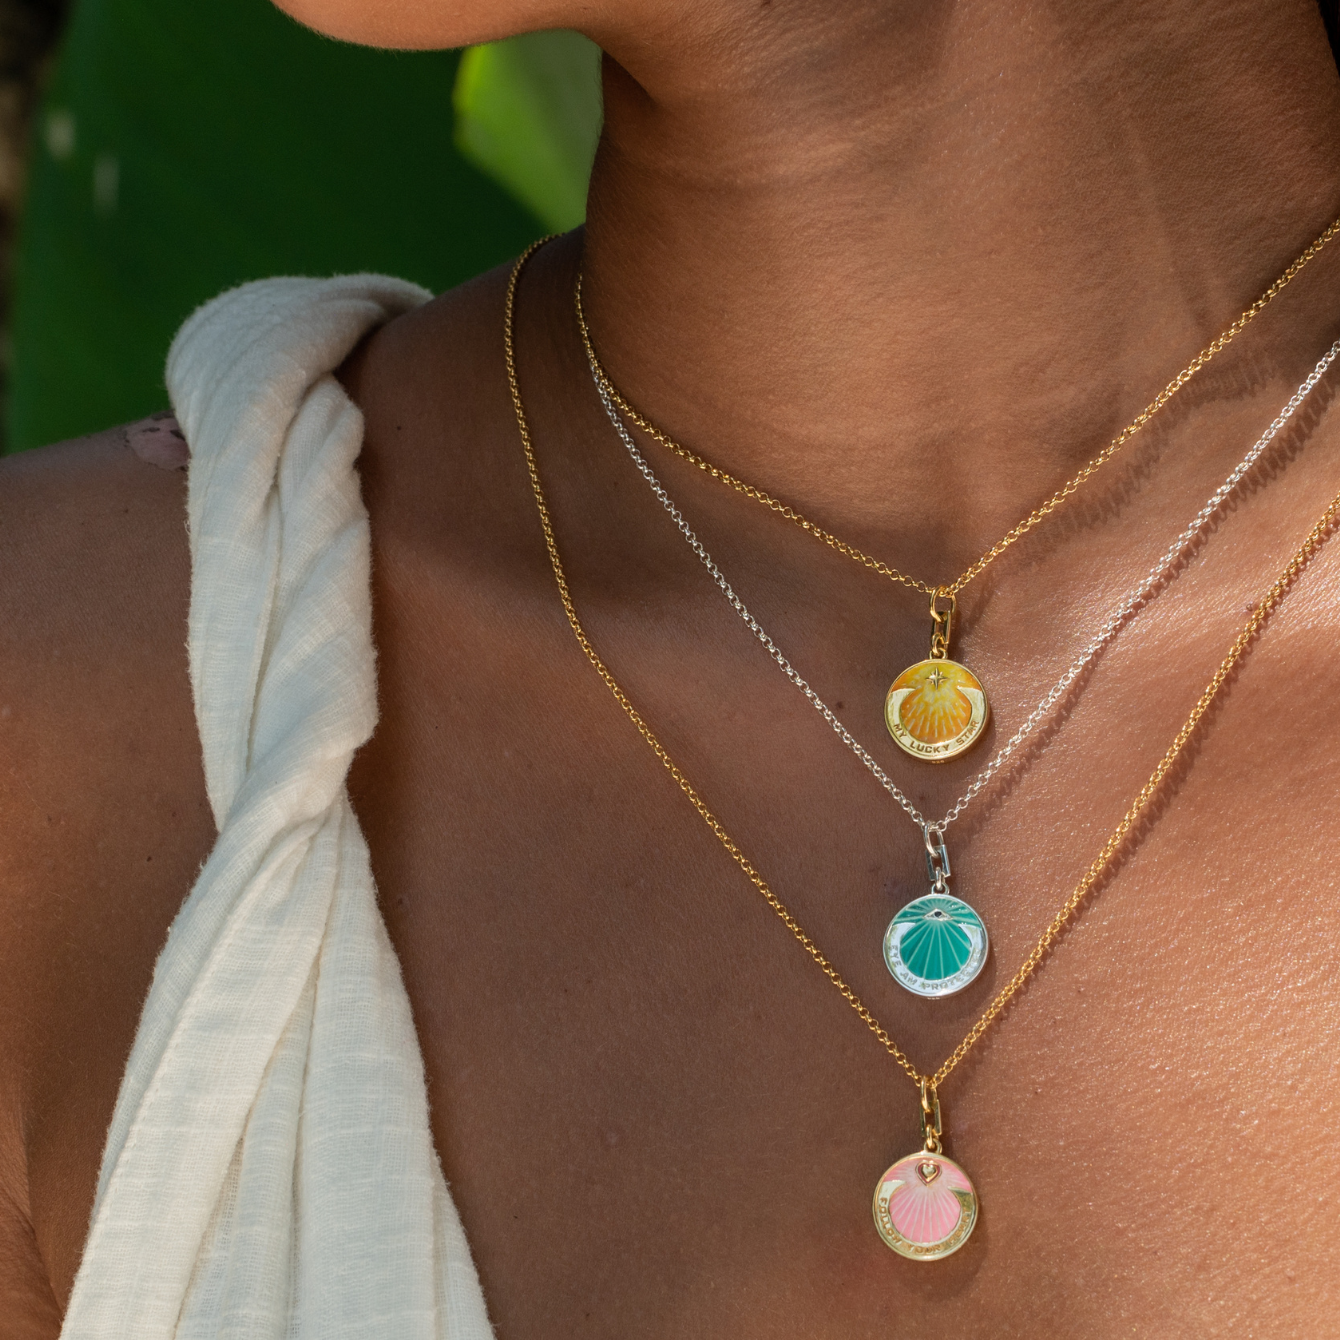 Colour Therapy - Embrace Positivity with Hand Painted Enamel Necklaces